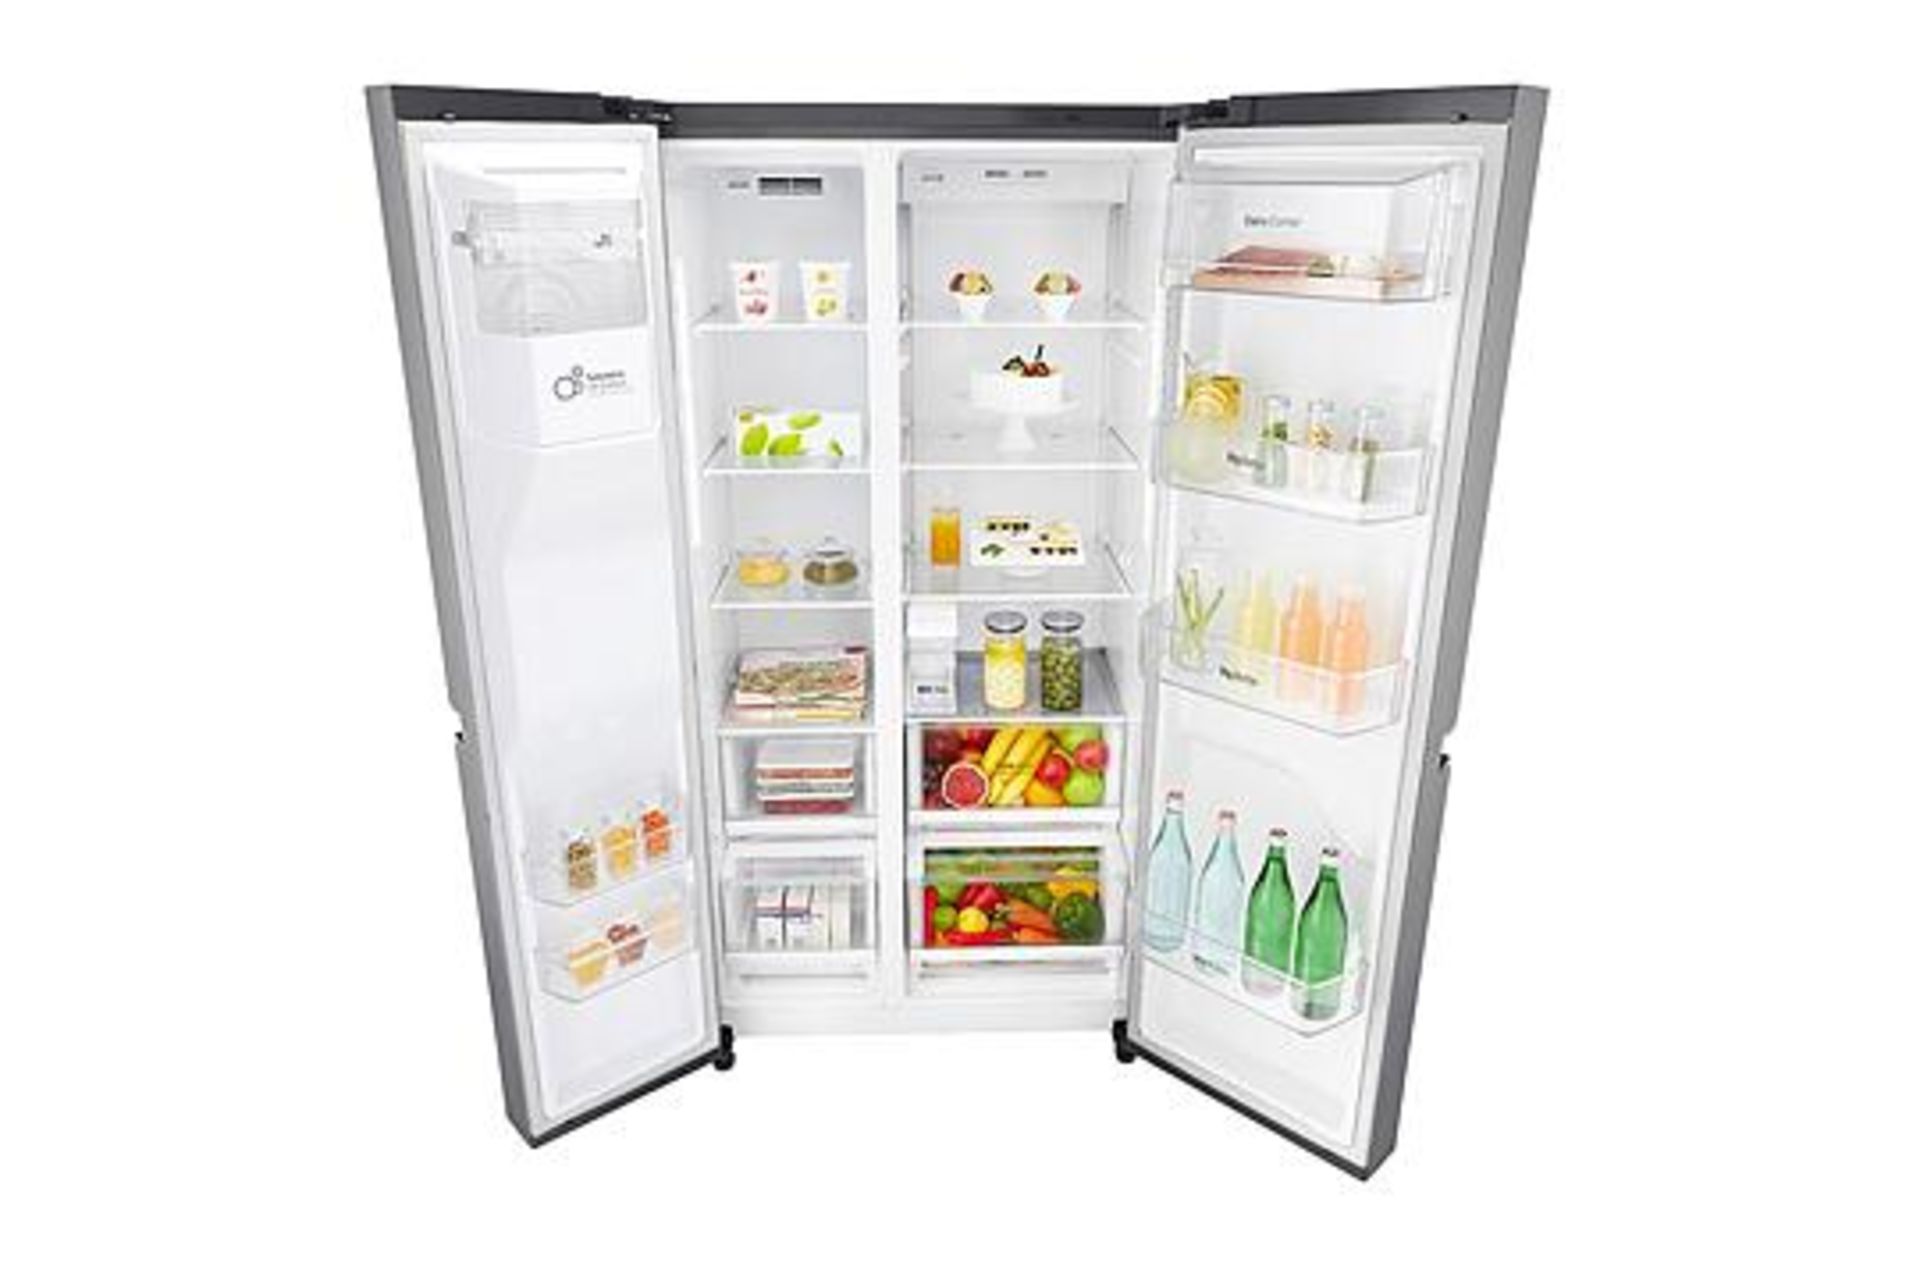 1 x LG GSL961 PXBV Stainless Steel American Style Fridge Freezer With Water and Ice Dispenser - - Image 2 of 8